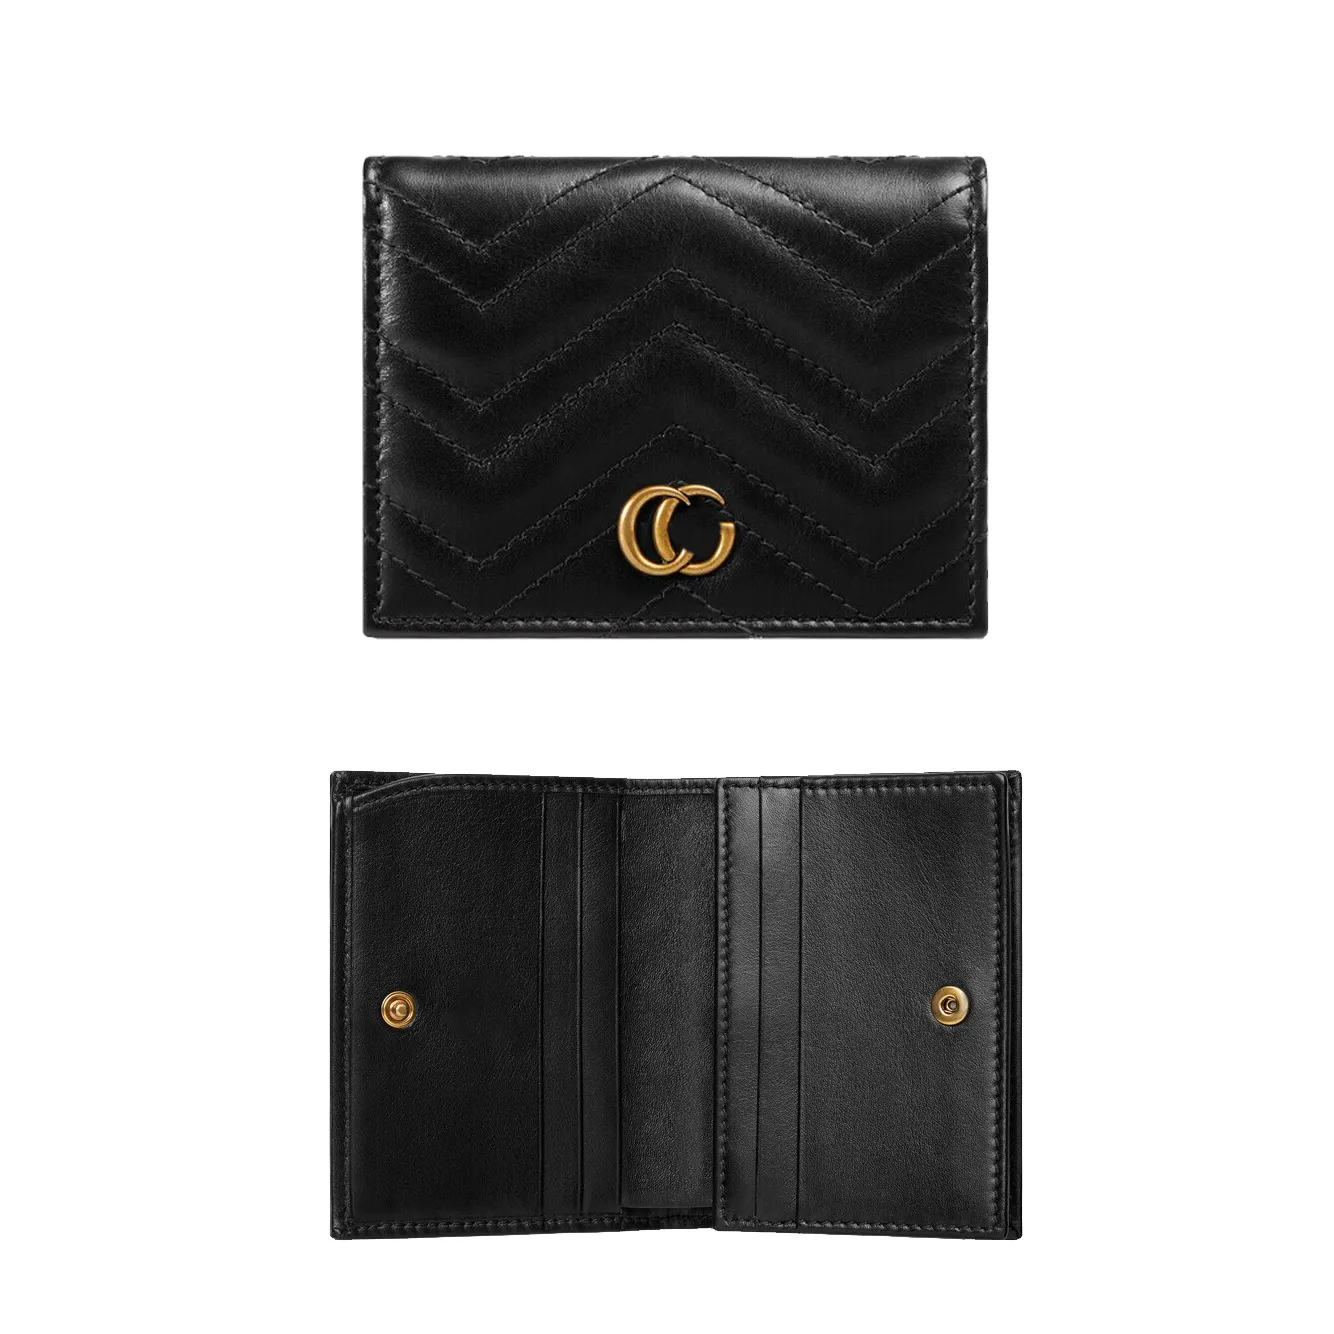 5A Genuine Leather Purses New Style Luxury Designer Card Holders G Wallets  Men Fashion Small Coin Holder With Box Women Key Wallet Handbags Bags  Interior Slot Womens From Ee54456, $8.47